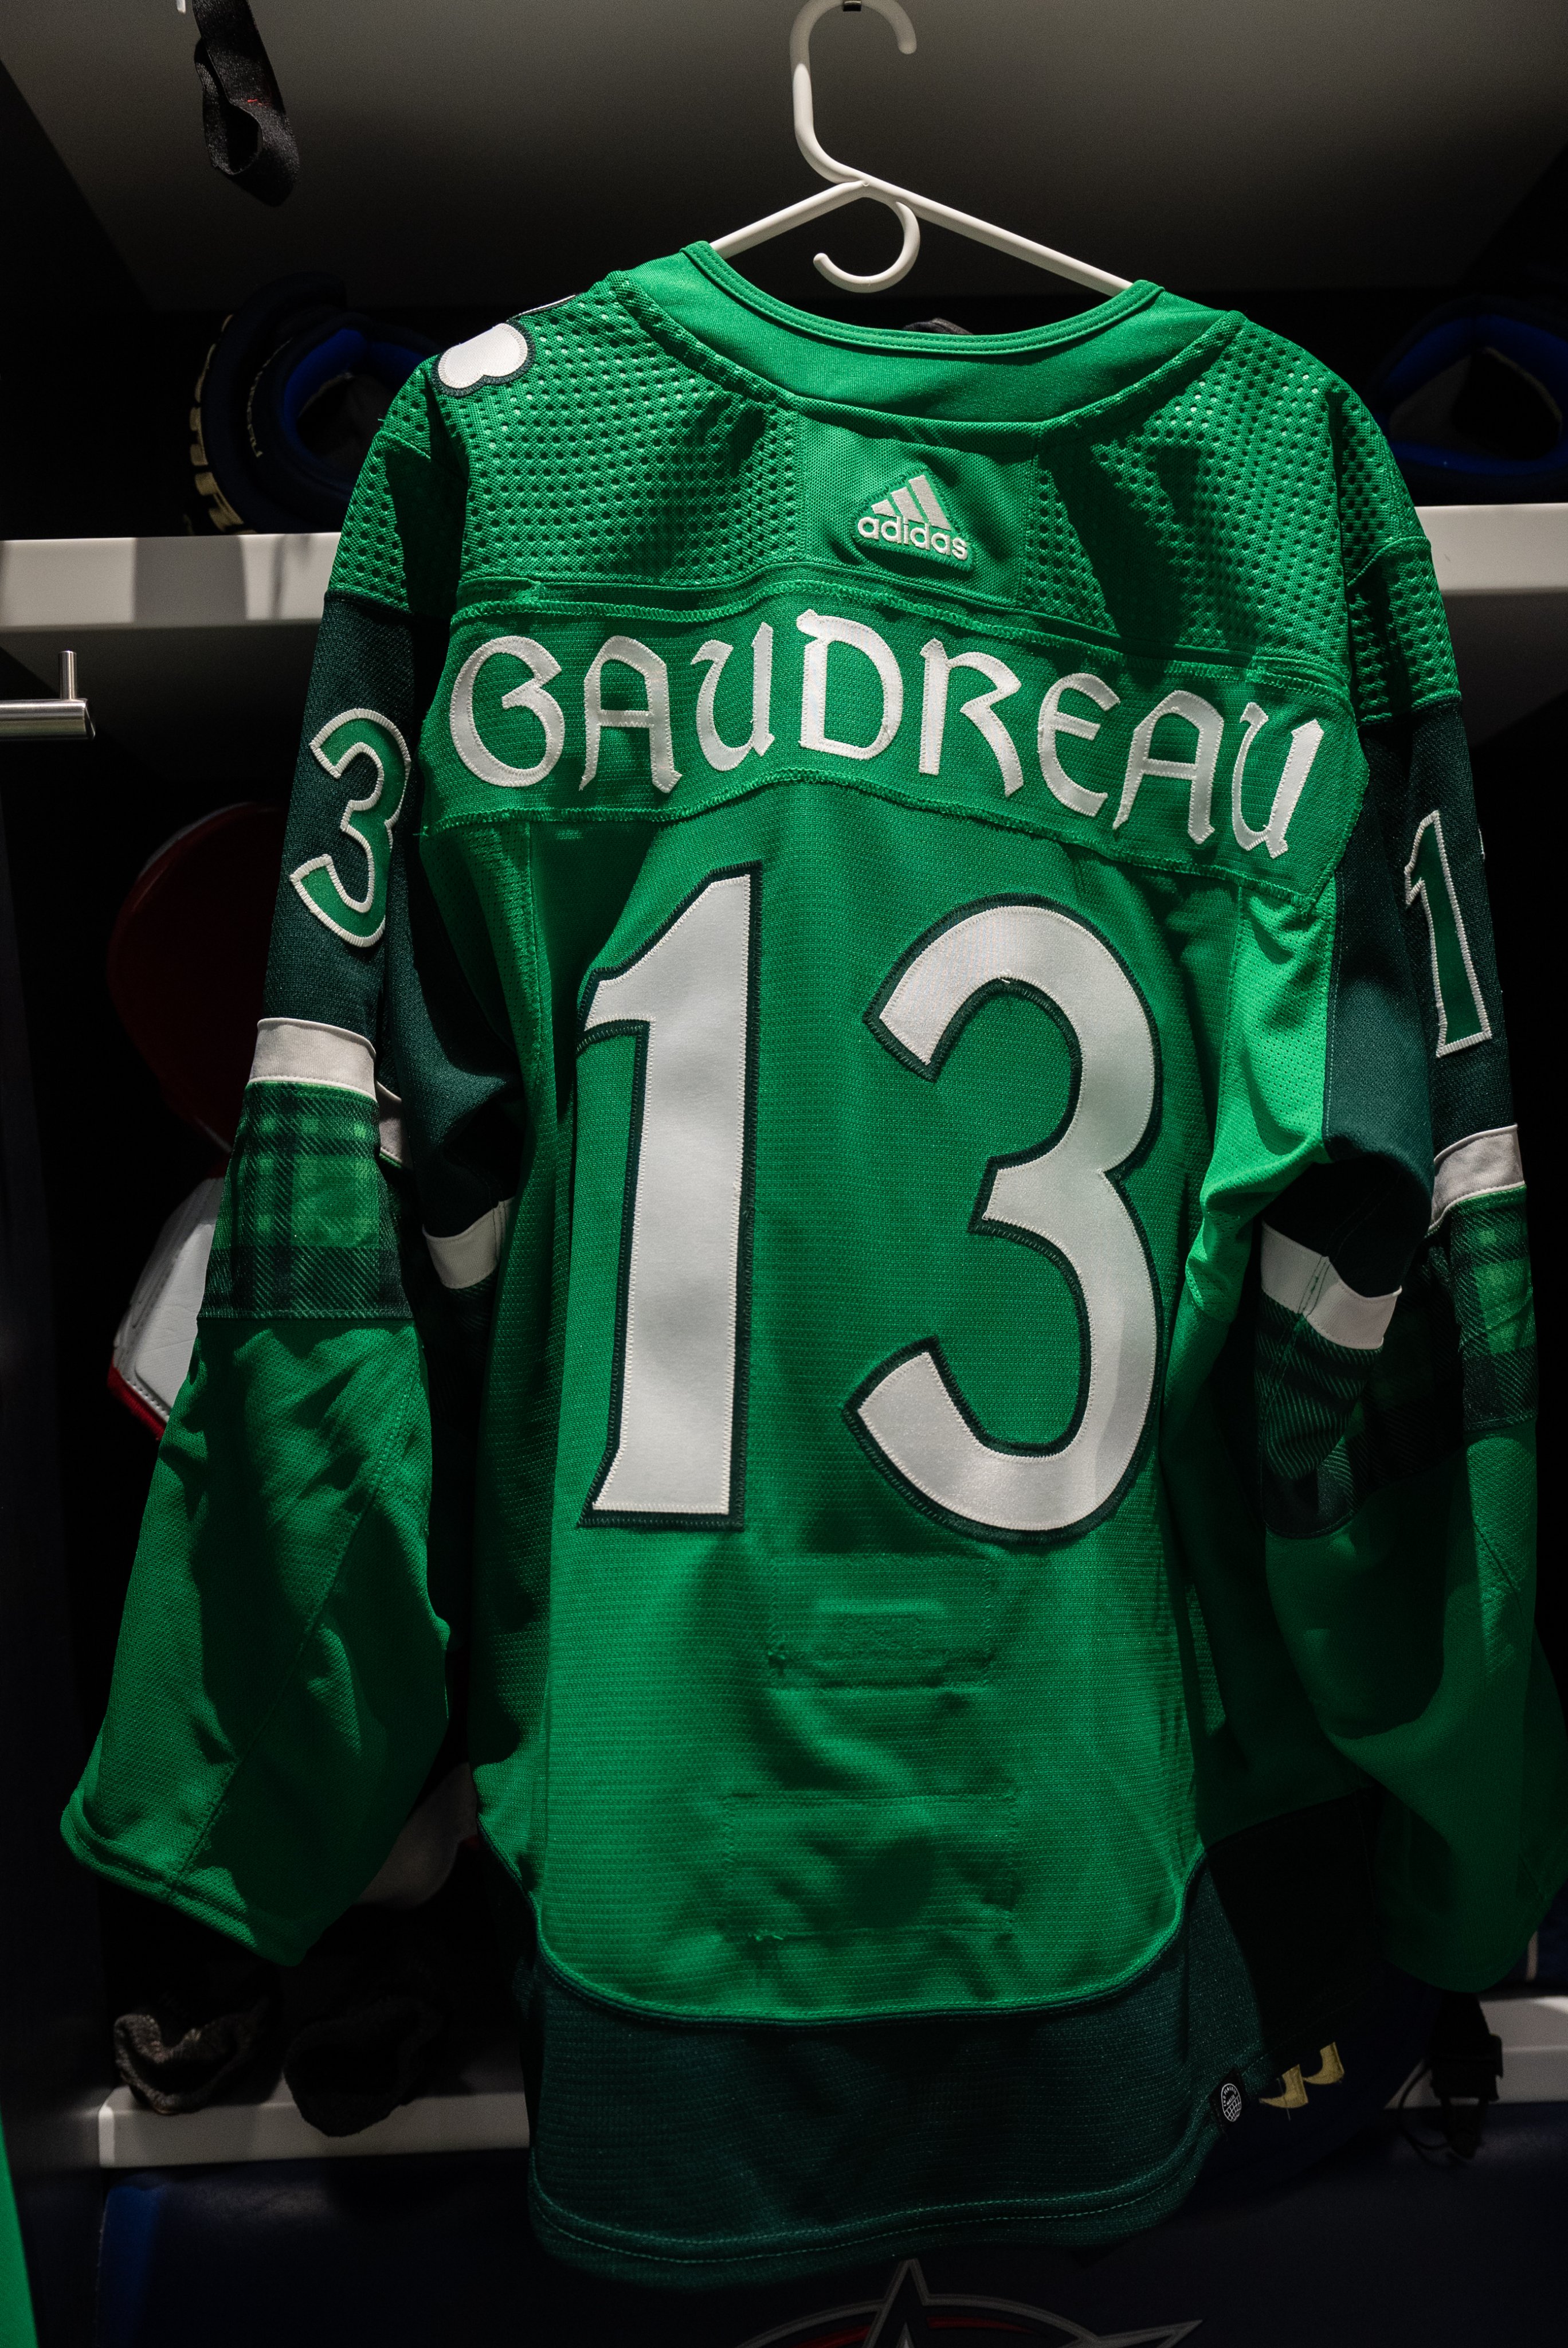 Columbus Blue Jackets on X: Sneak peak of our green warmup